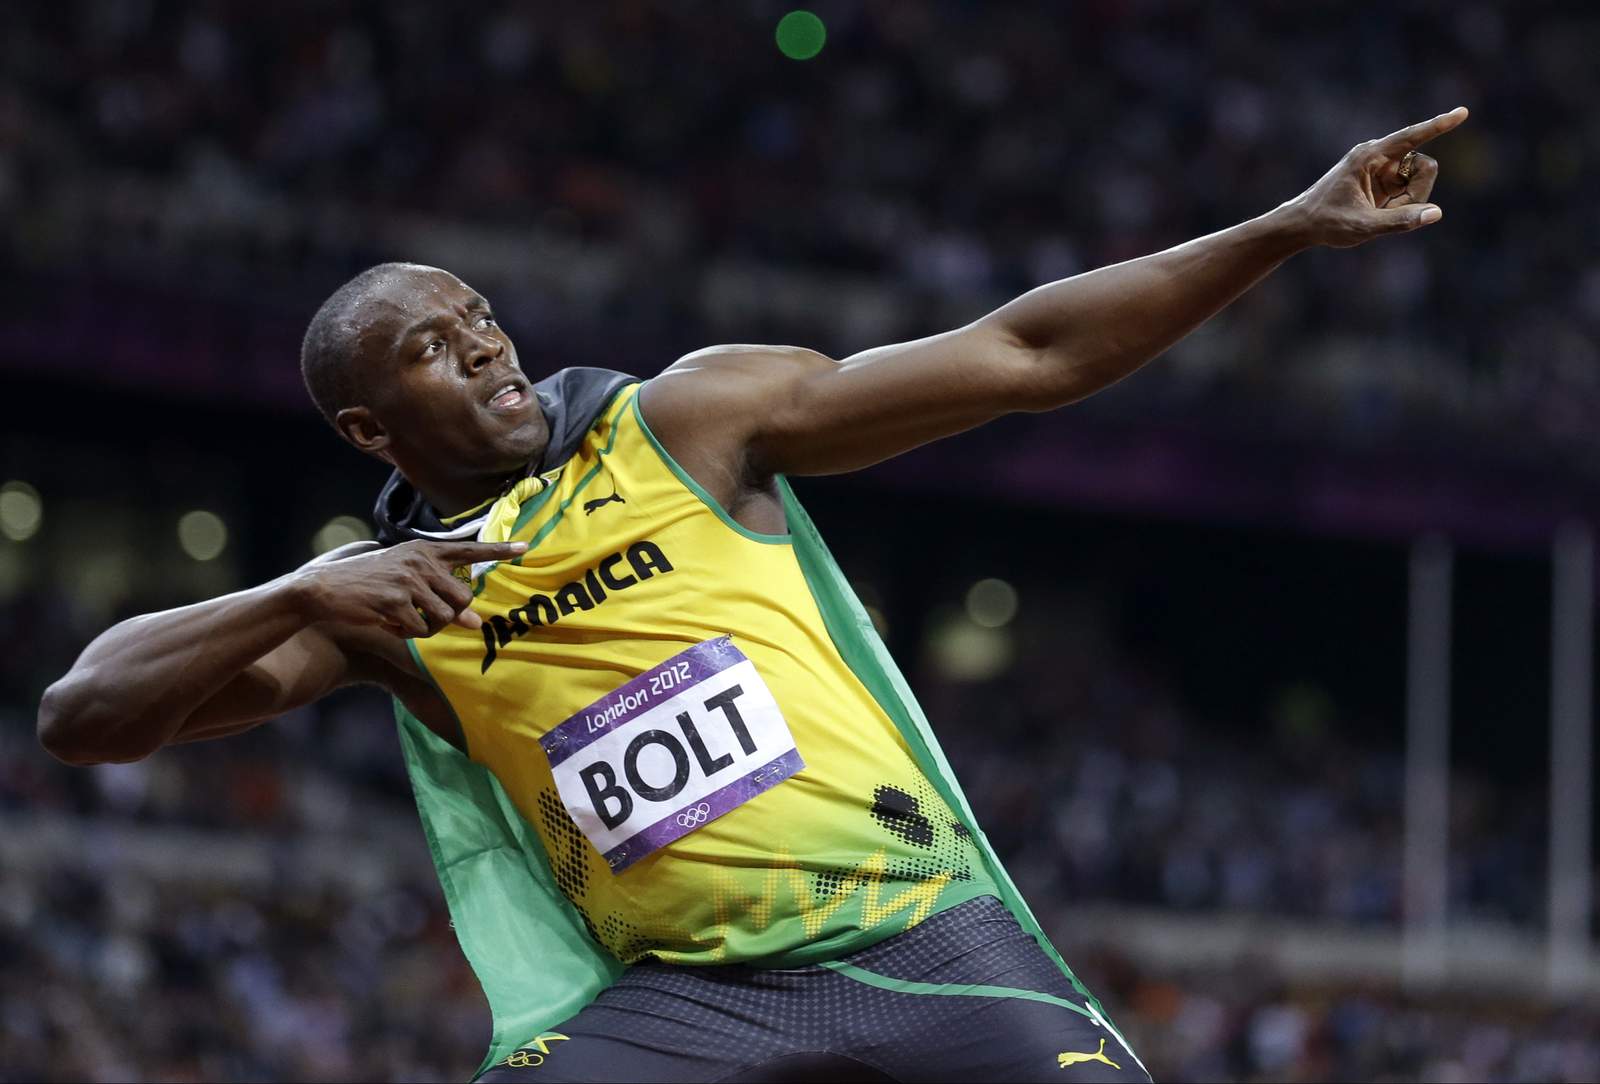 Jamaican official says Usain Bolt tests positive for COVID